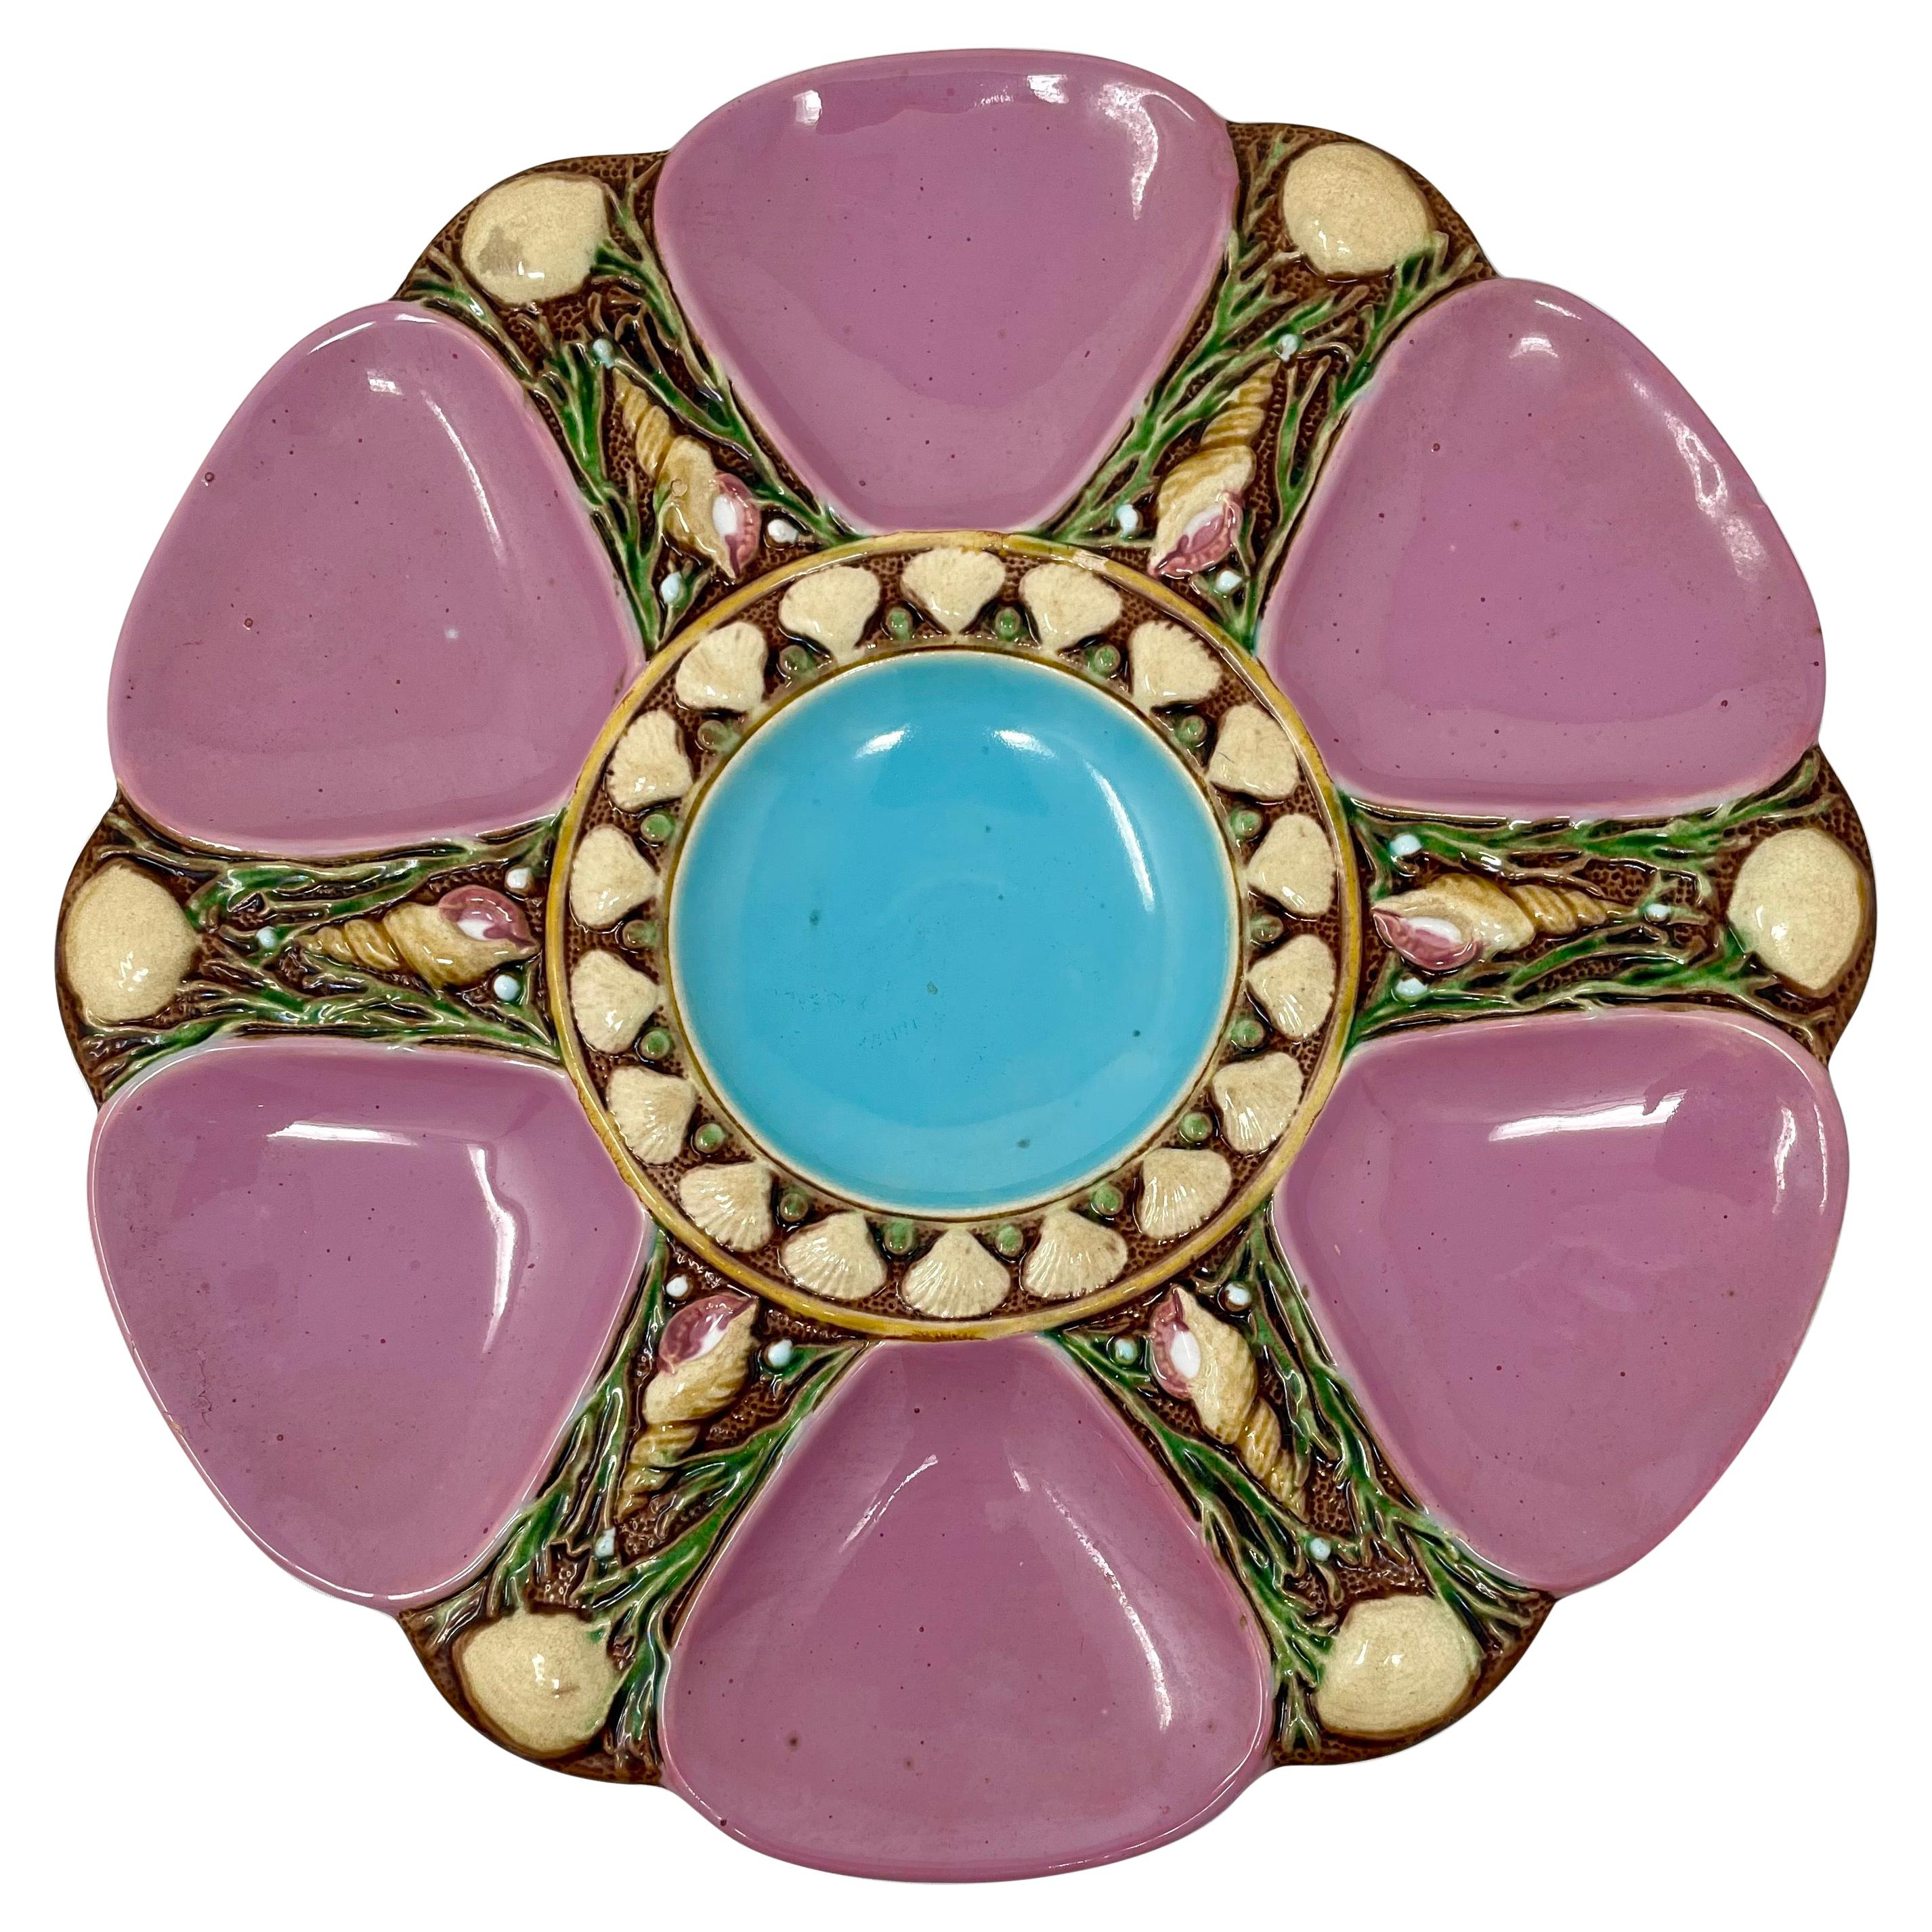 Antique Early English Minton Majolica Porcelain Pink Oyster Plate, Circa 1875 For Sale